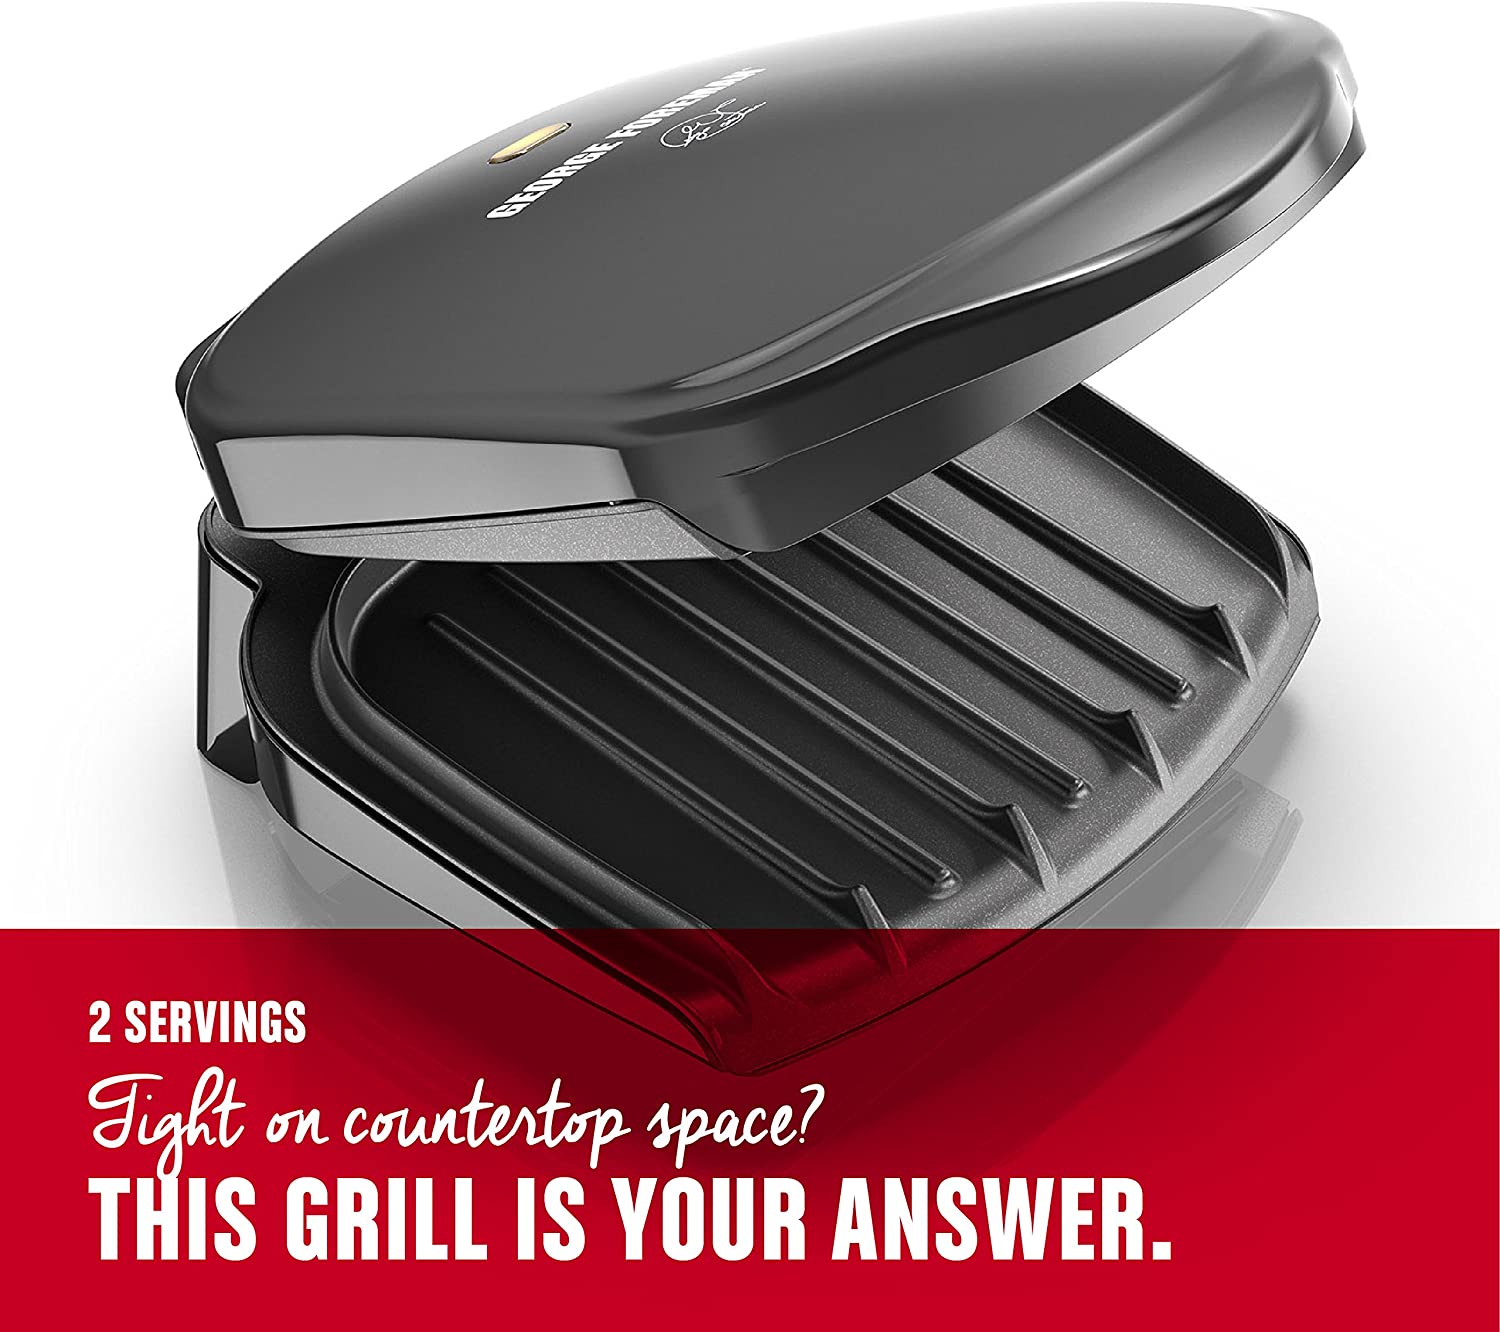 George Foreman grill is a great kitchen space saver